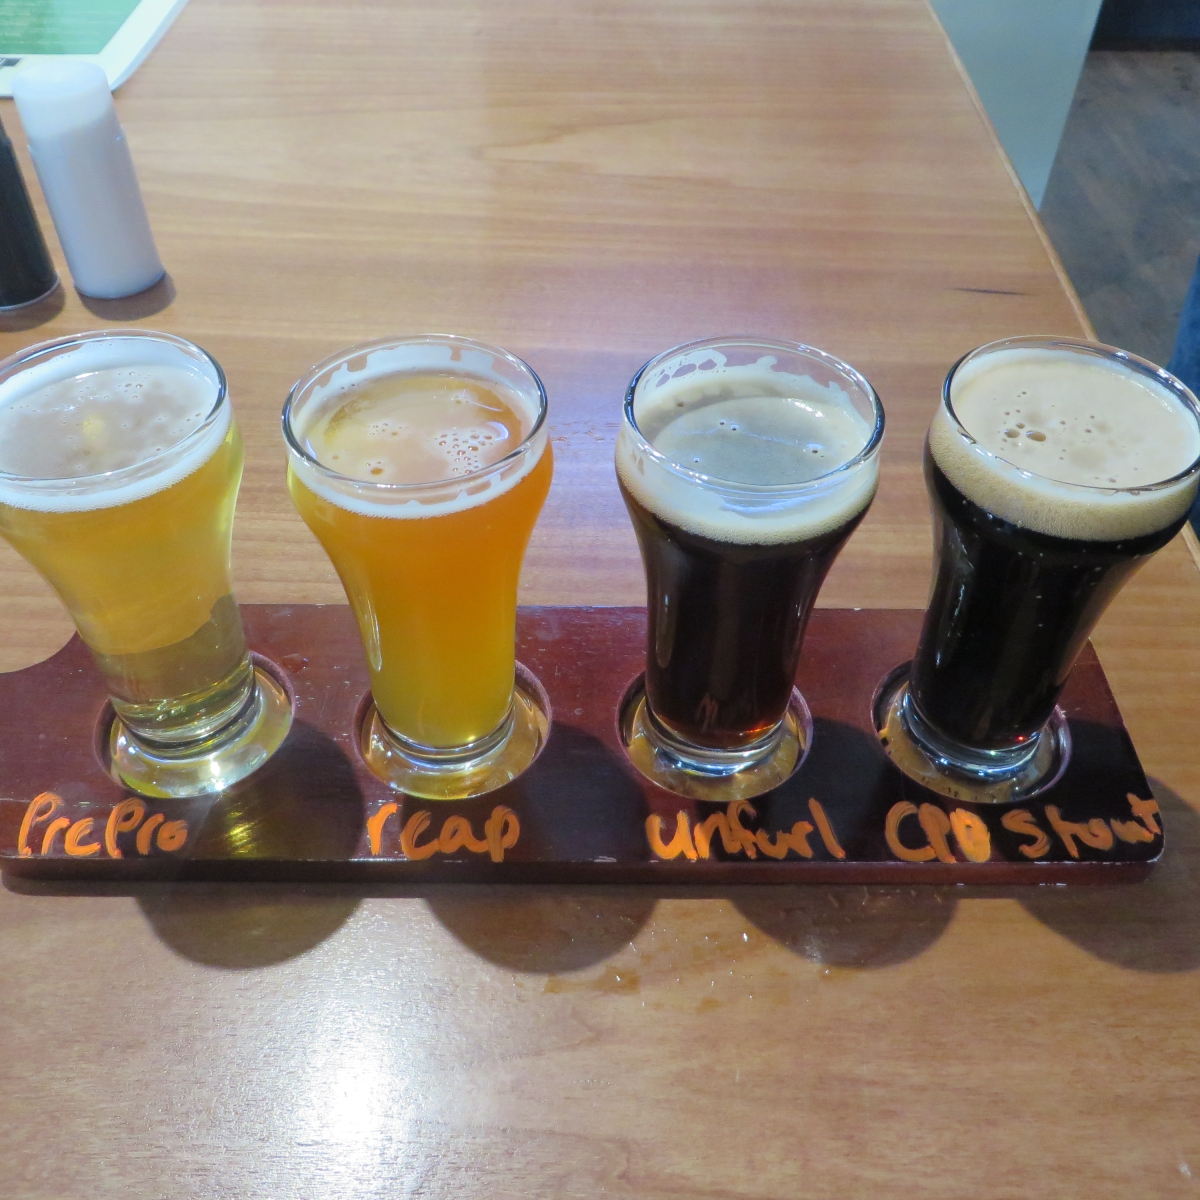 Flight of beers at Four Mile Brewing (2016, Tourism)